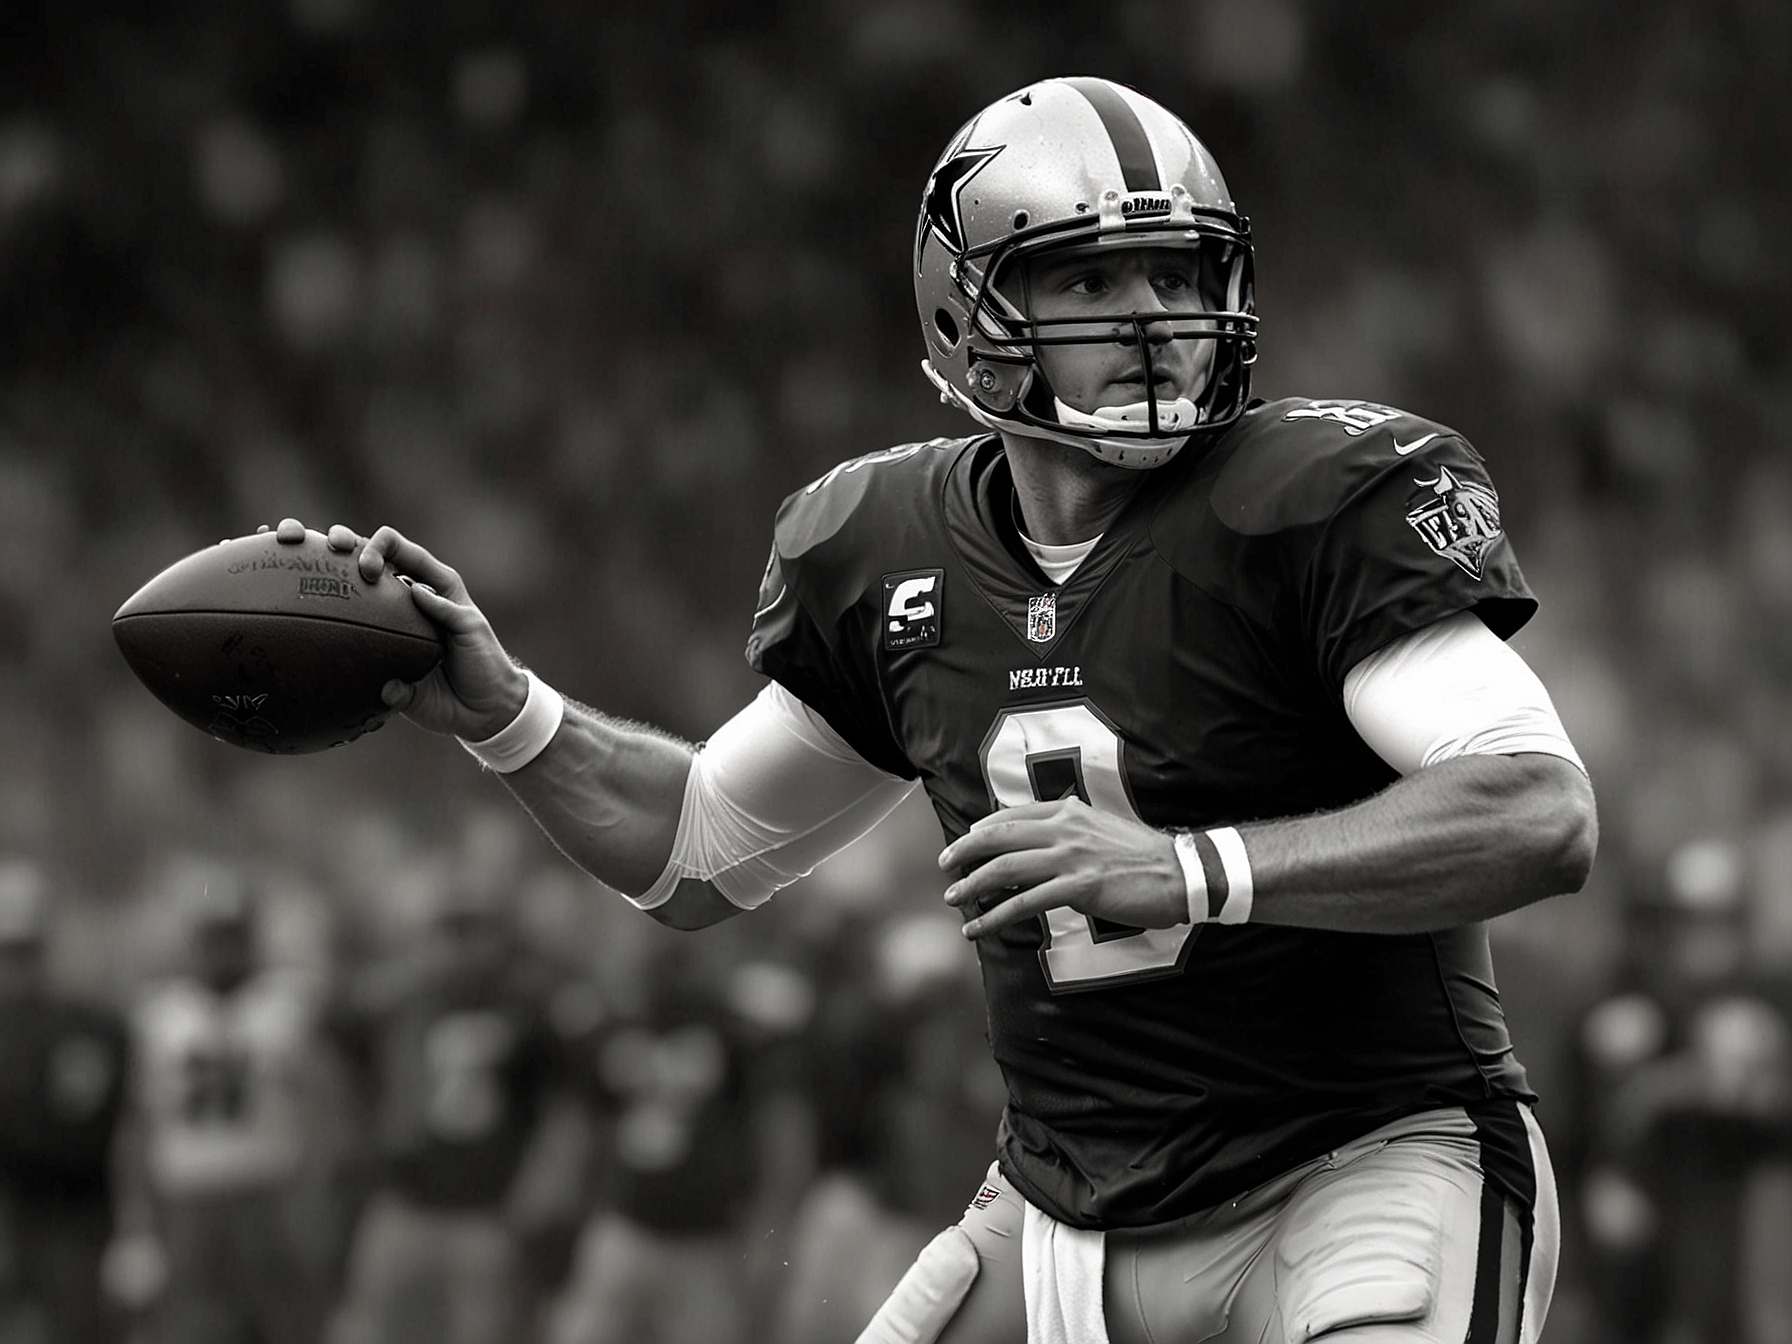 A star NFL quarterback returns to action during a high-stakes playoff game, illustrating the impact of the new Injured Reserve rule policy on player participation and game quality.